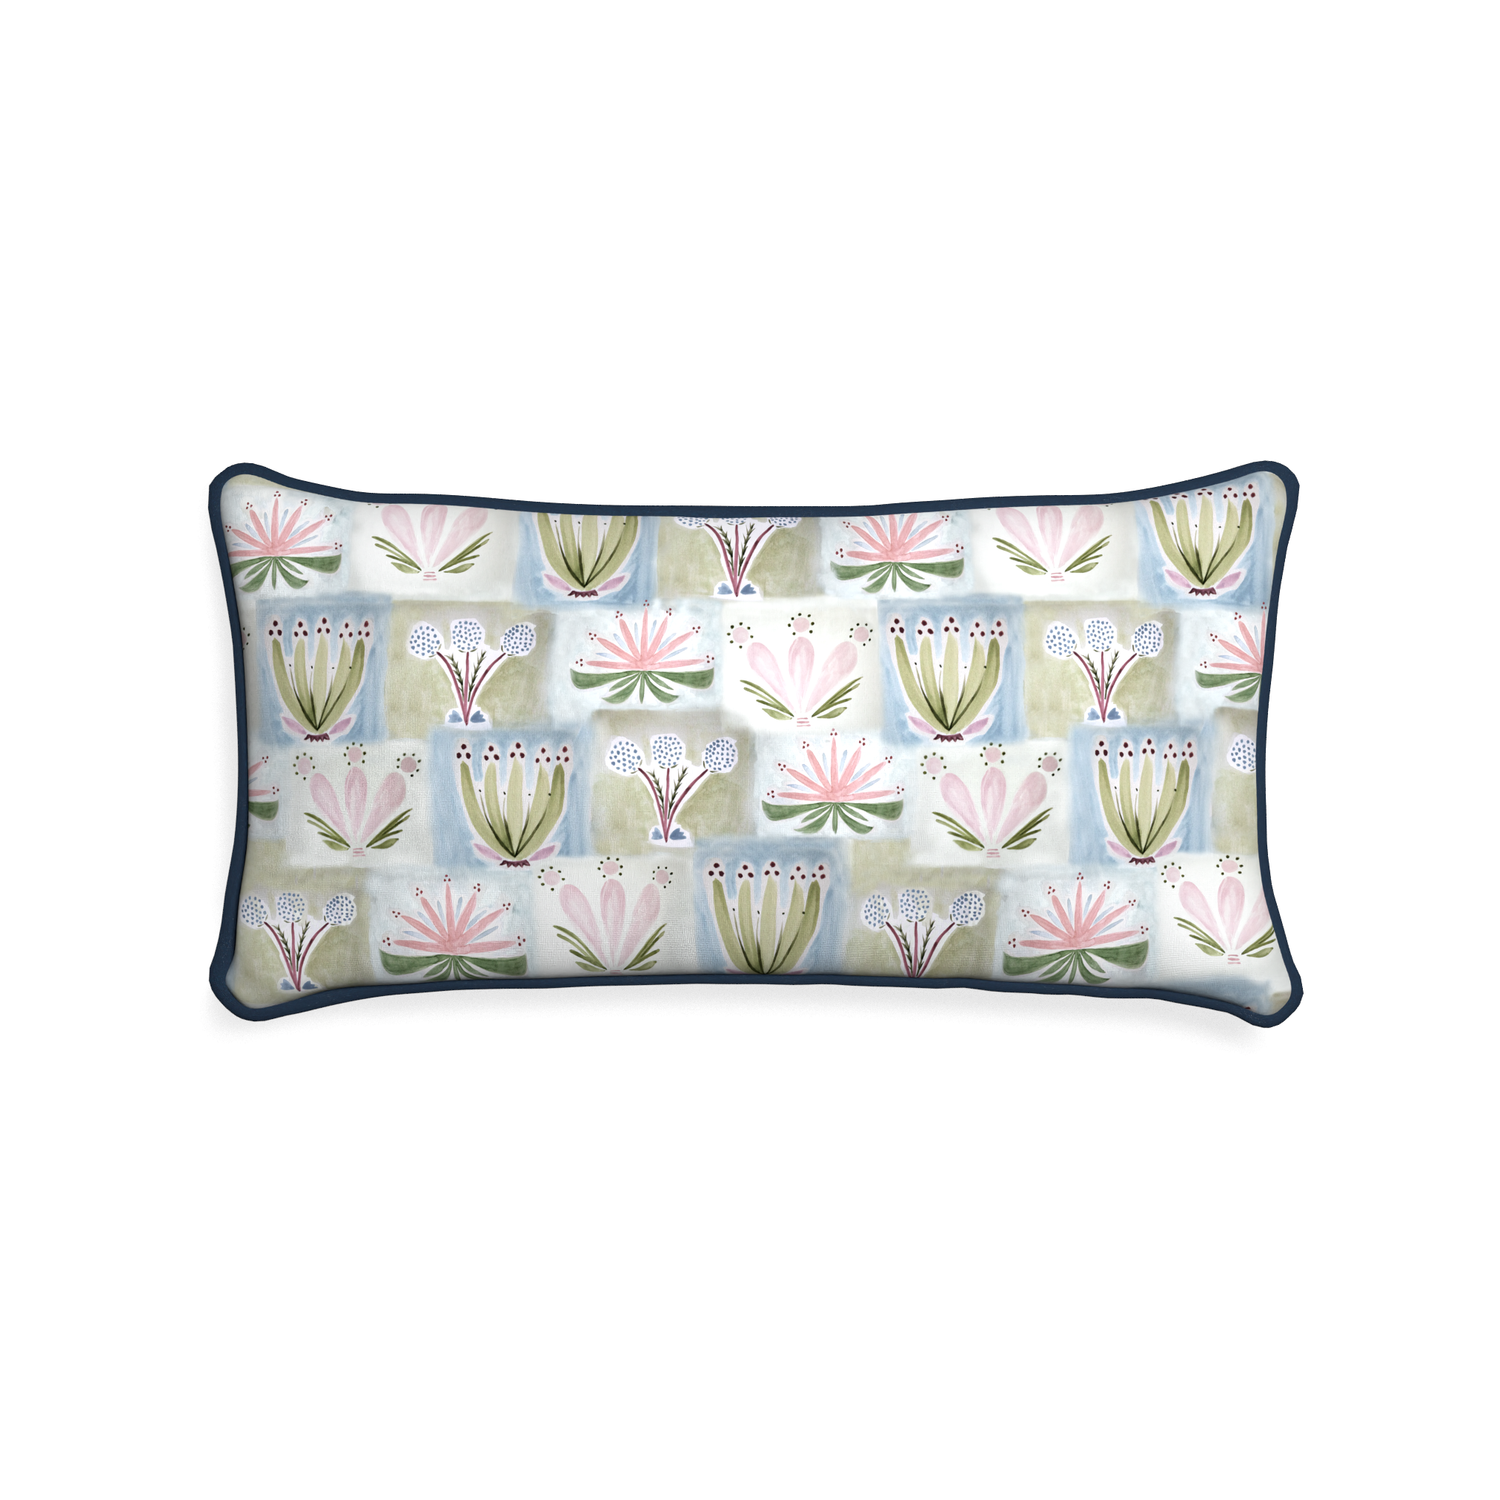 Midi-lumbar harper custom hand-painted floralpillow with c piping on white background